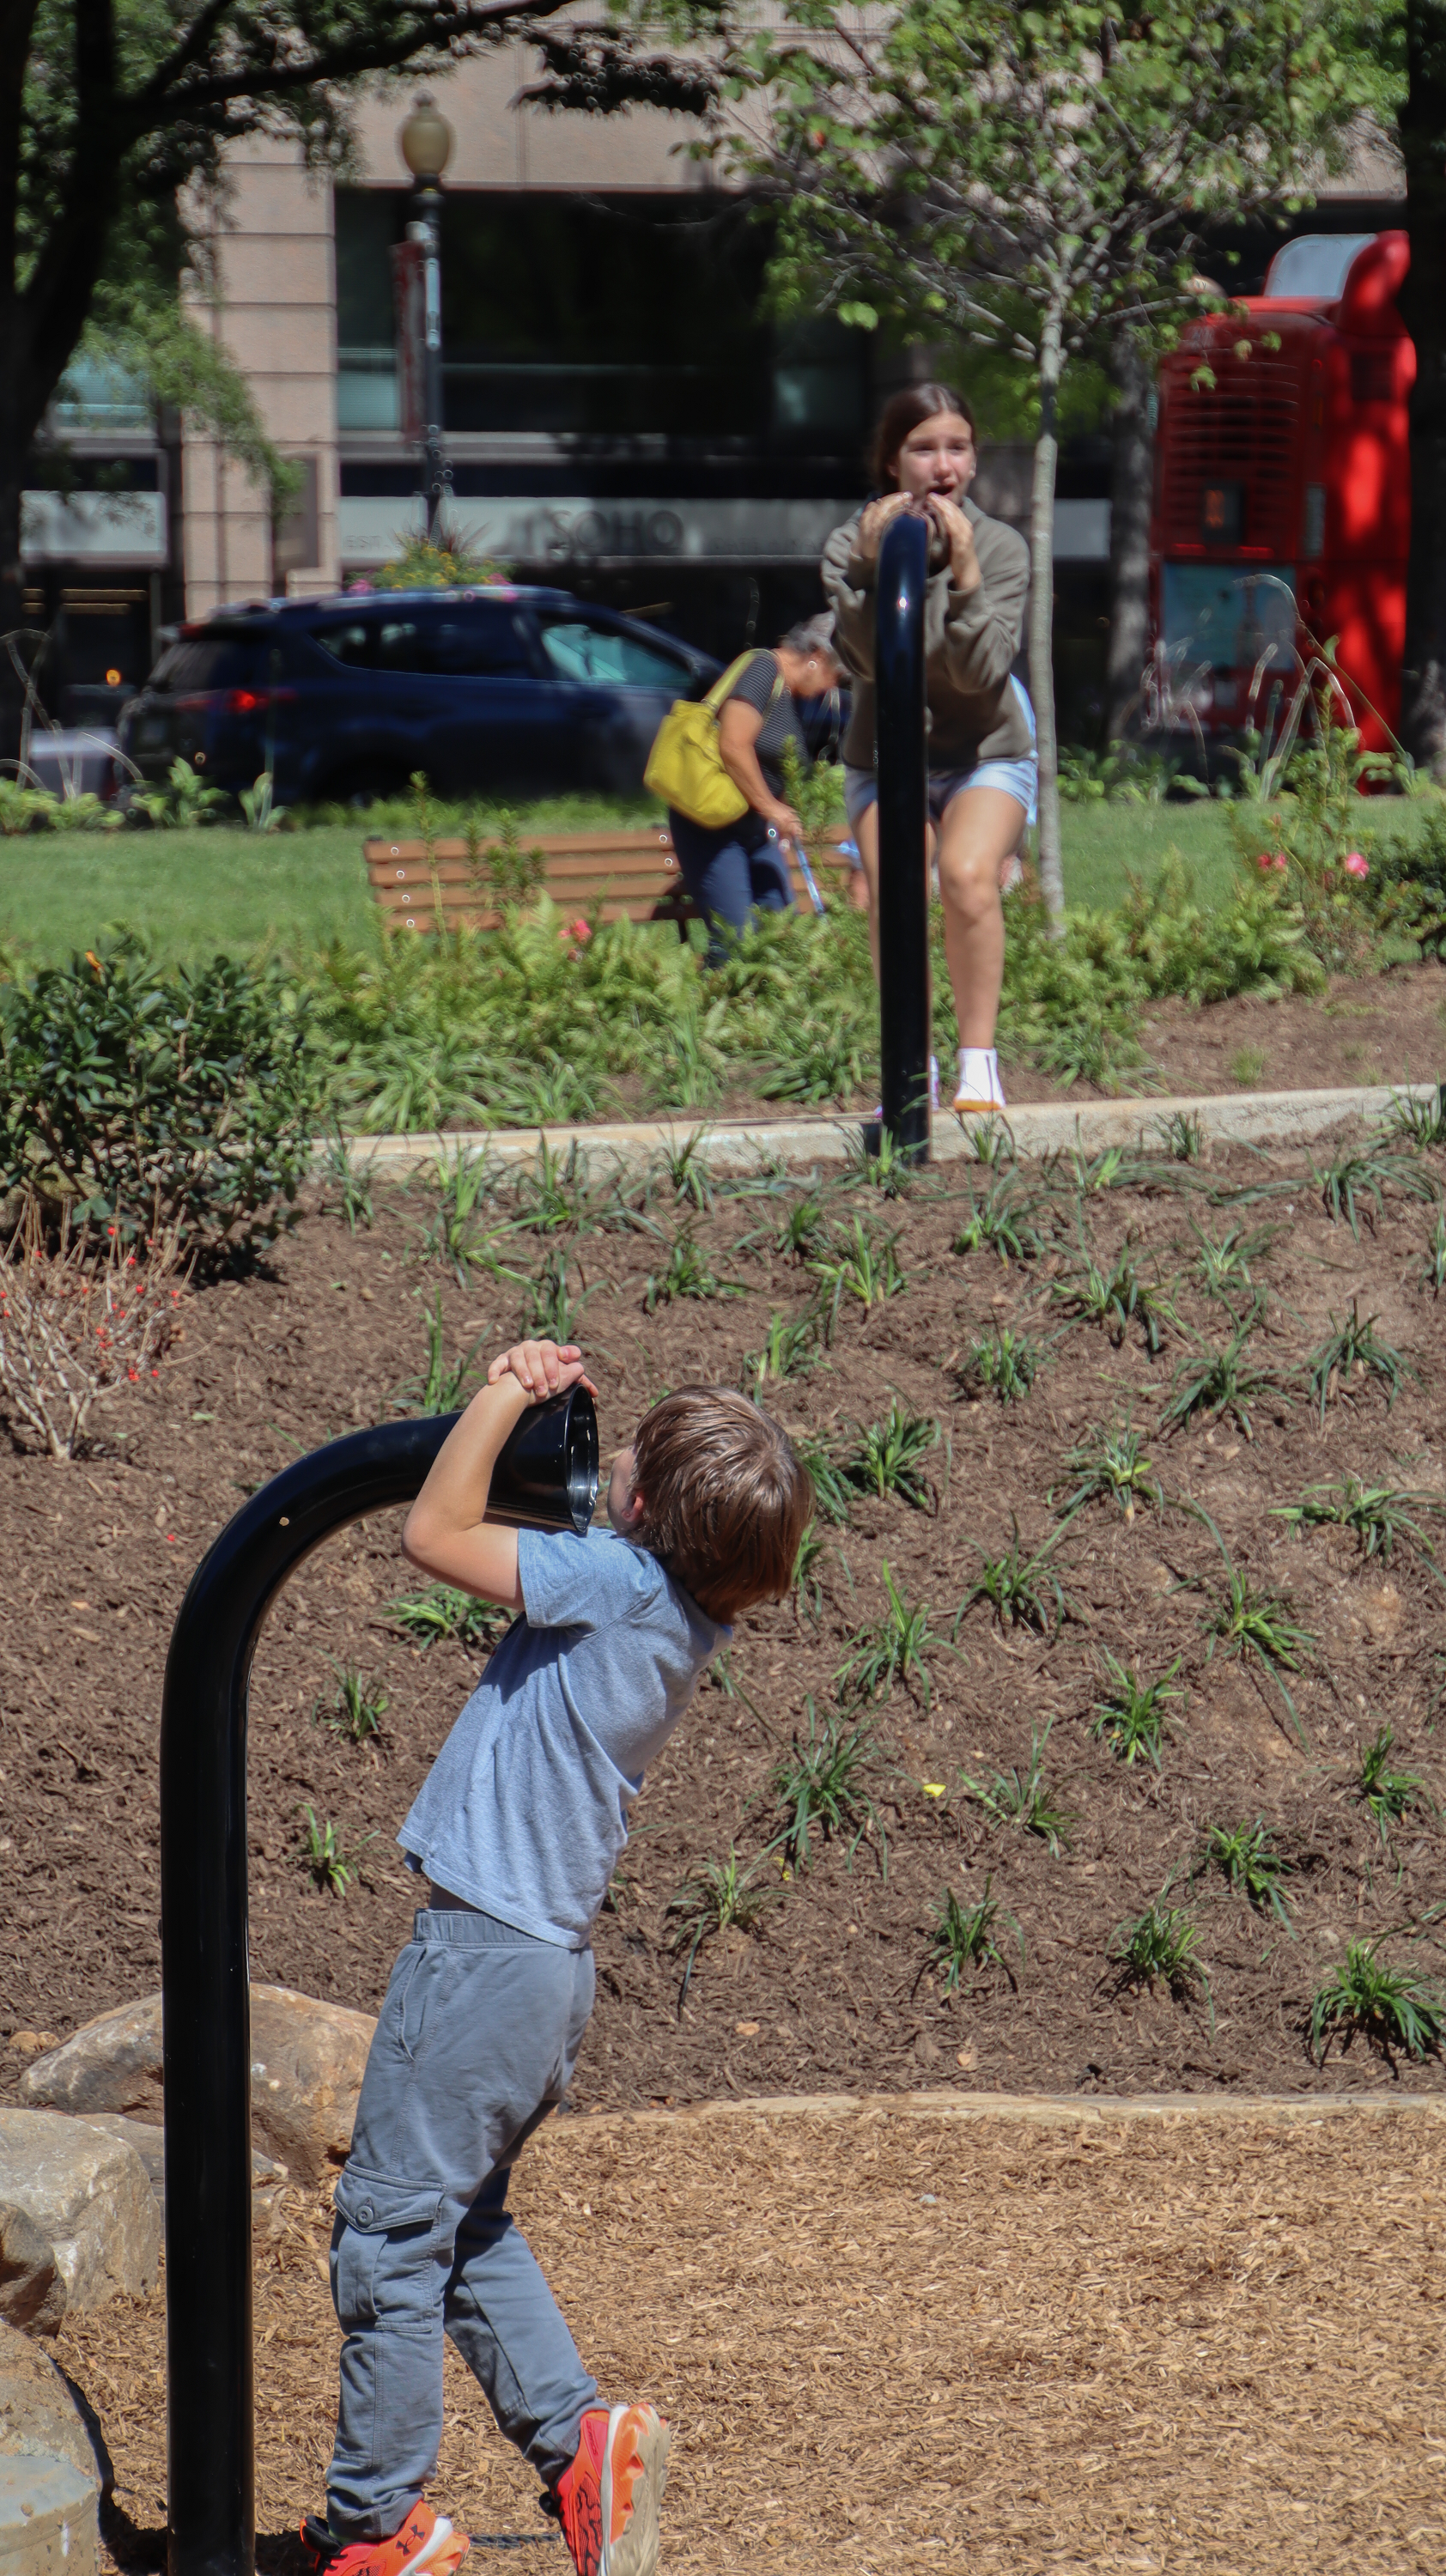 Two children speak to each other through a port-hole telephone in the kids area at newly-renovated Franklin Park.